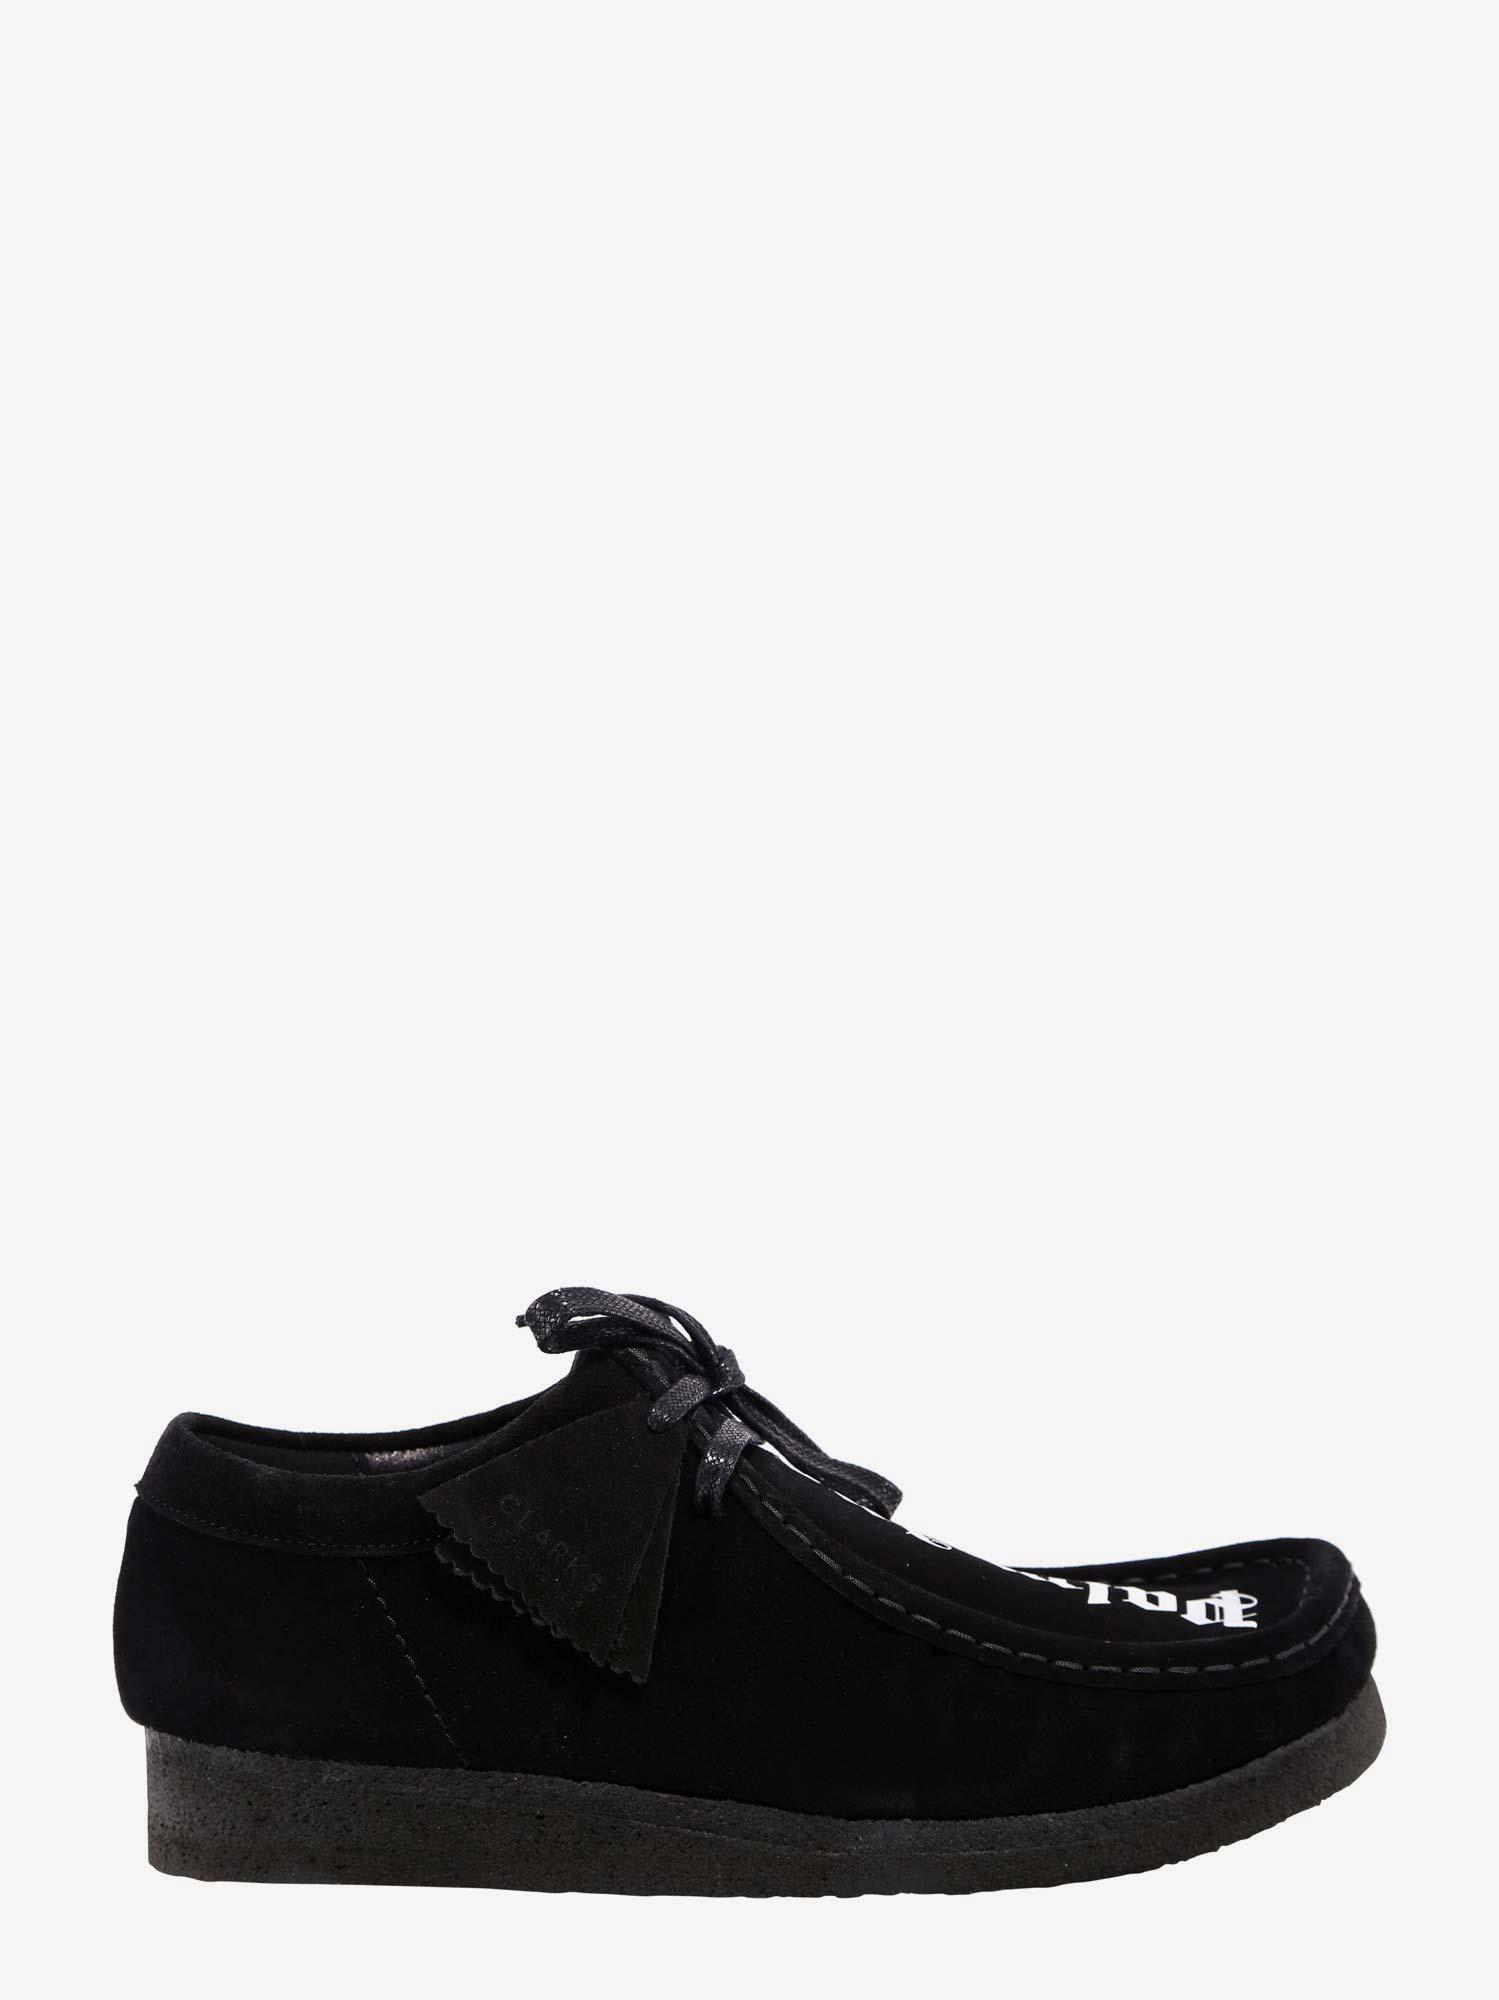 Palm Angels Leather Lace-up Shoe in Black for Men - Lyst